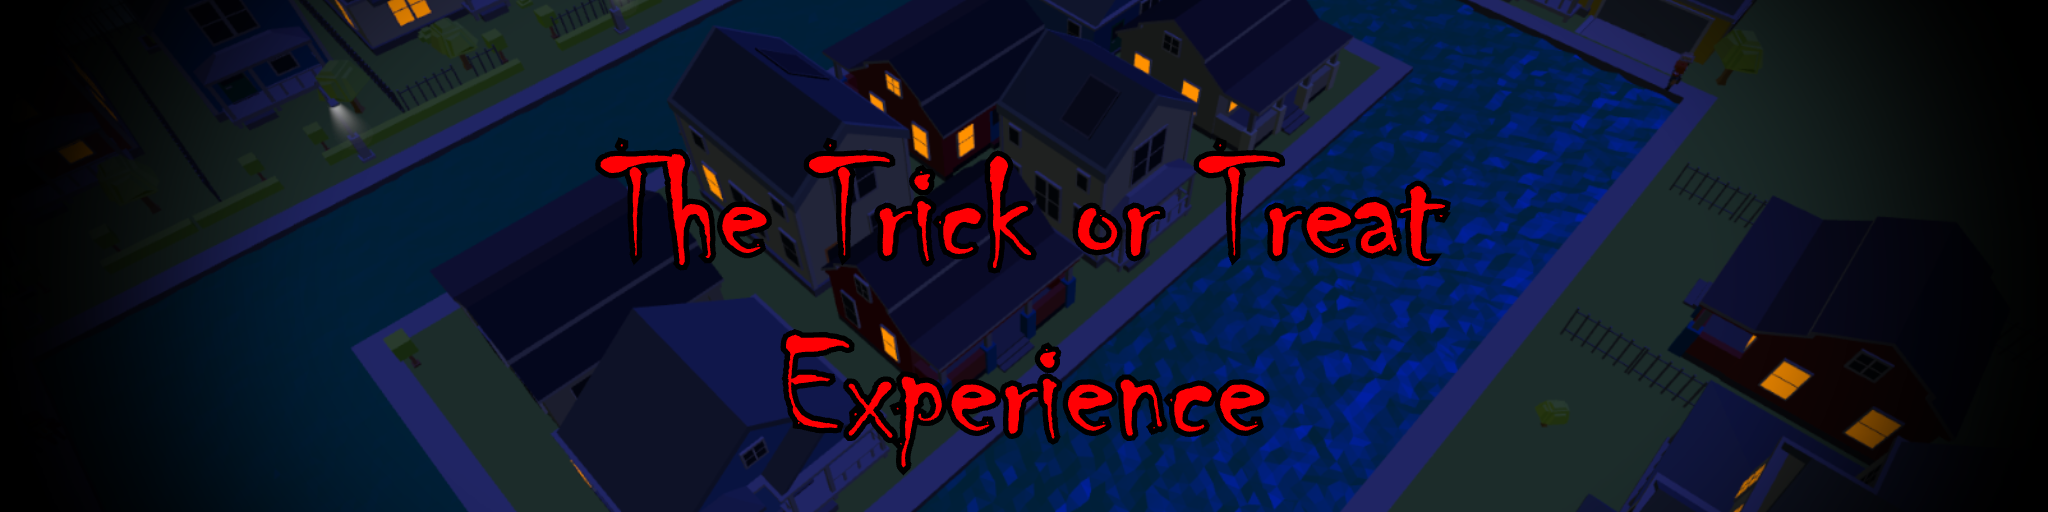 The Trick or Treat Experience (Oculus Go)